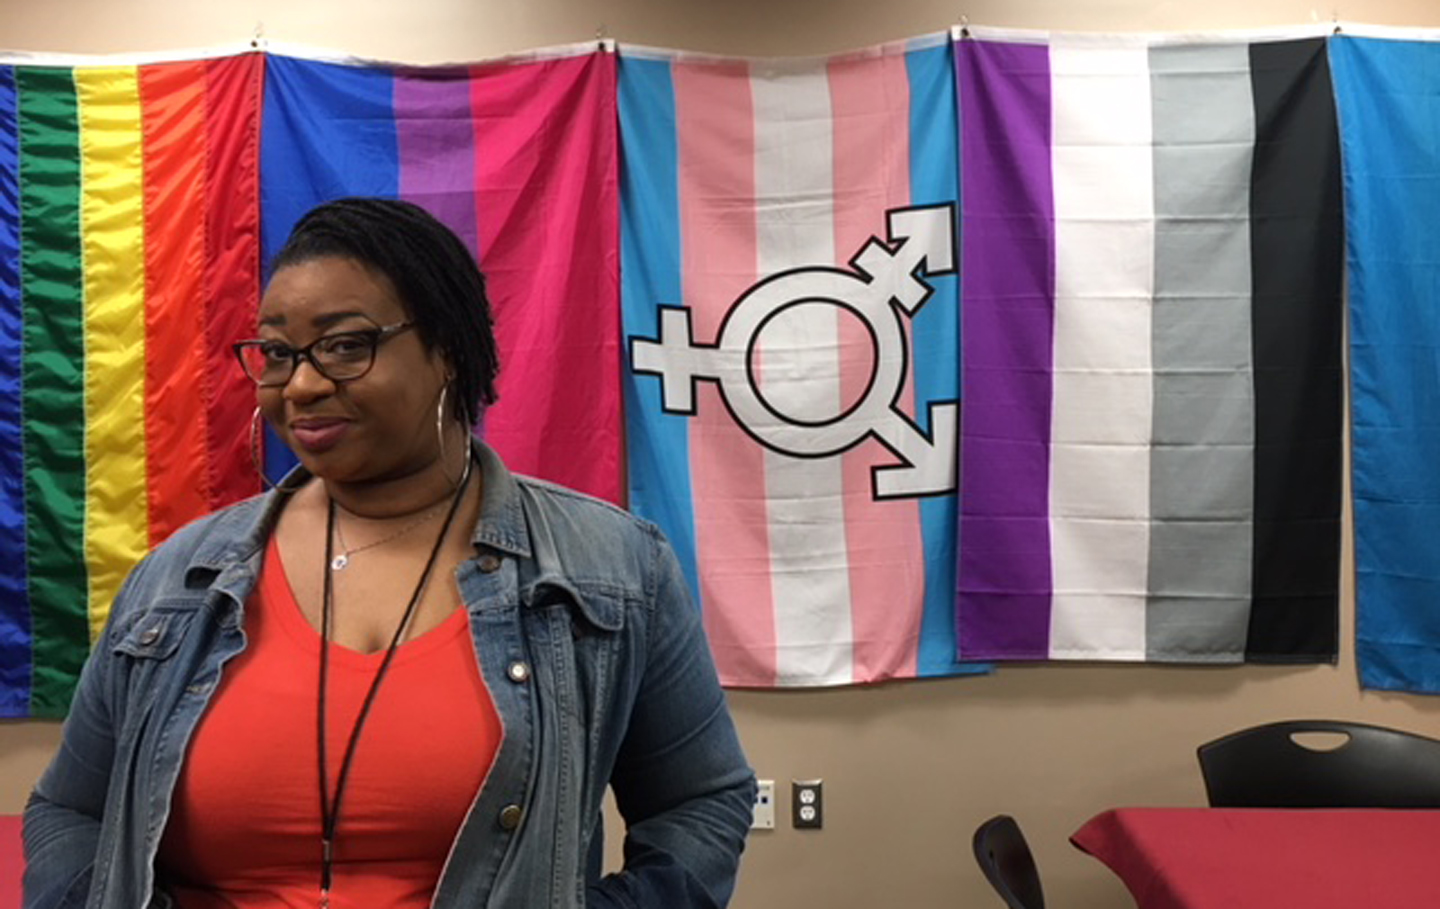 It’s Time for HBCUs to Address Homophobia and Transphobia on Their Campuses